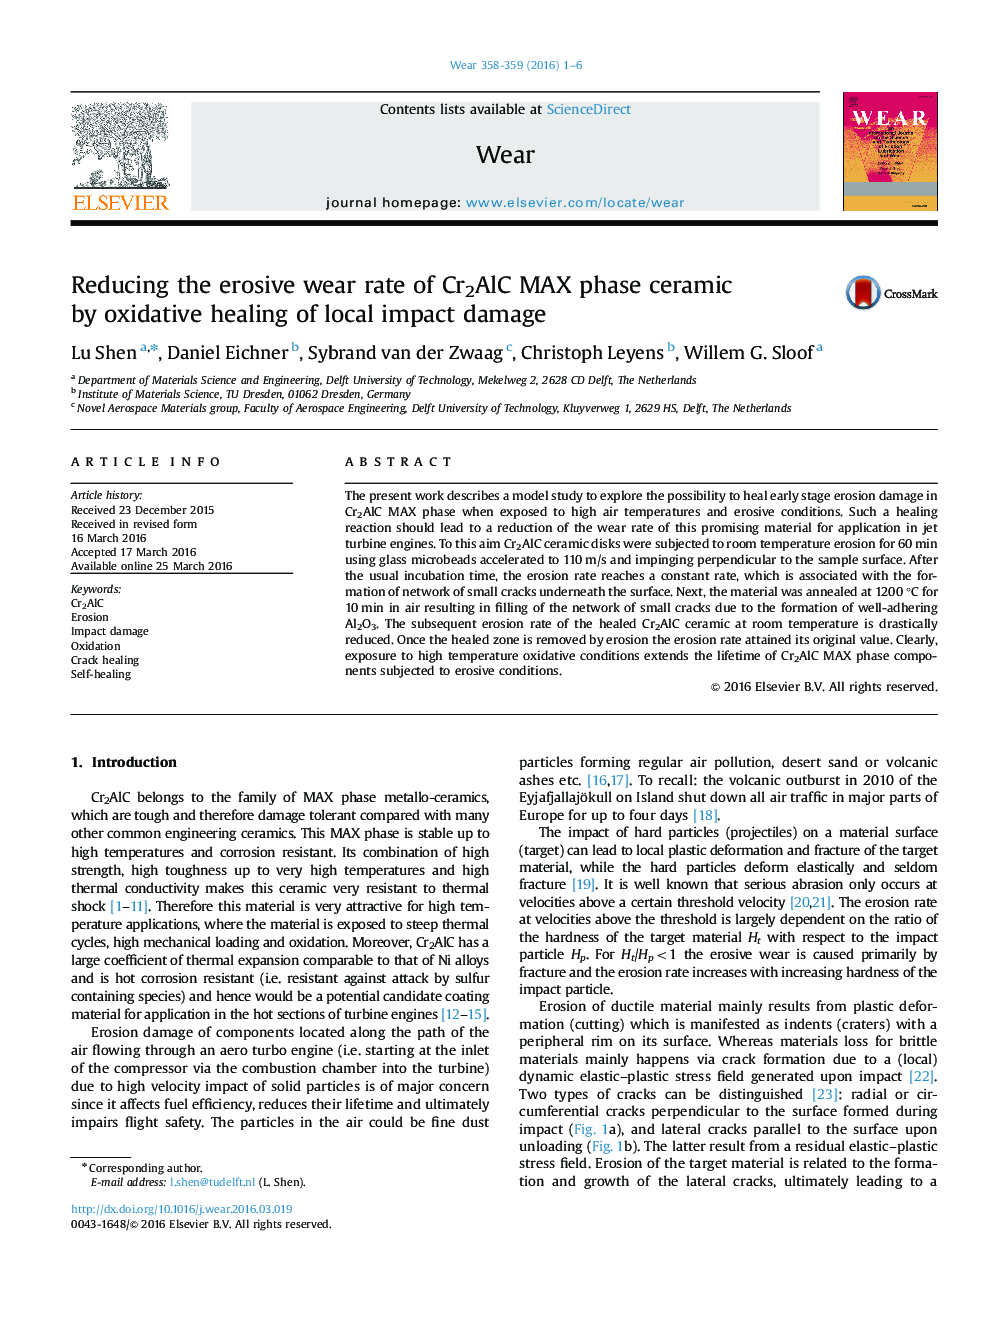 Reducing the erosive wear rate of Cr2AlC MAX phase ceramic by oxidative healing of local impact damage